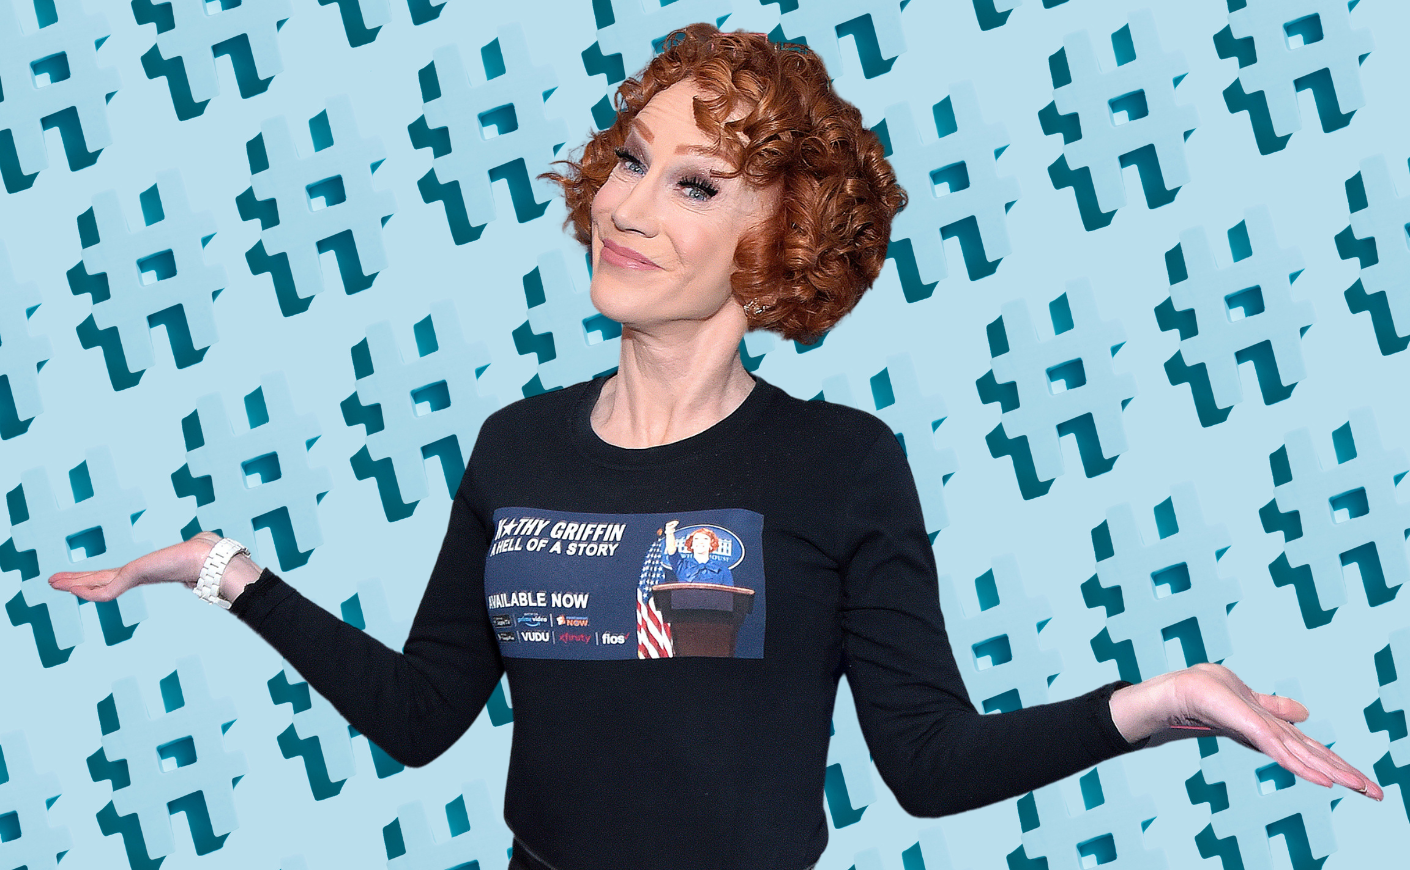 kathy griffin against a blue background of hashtags